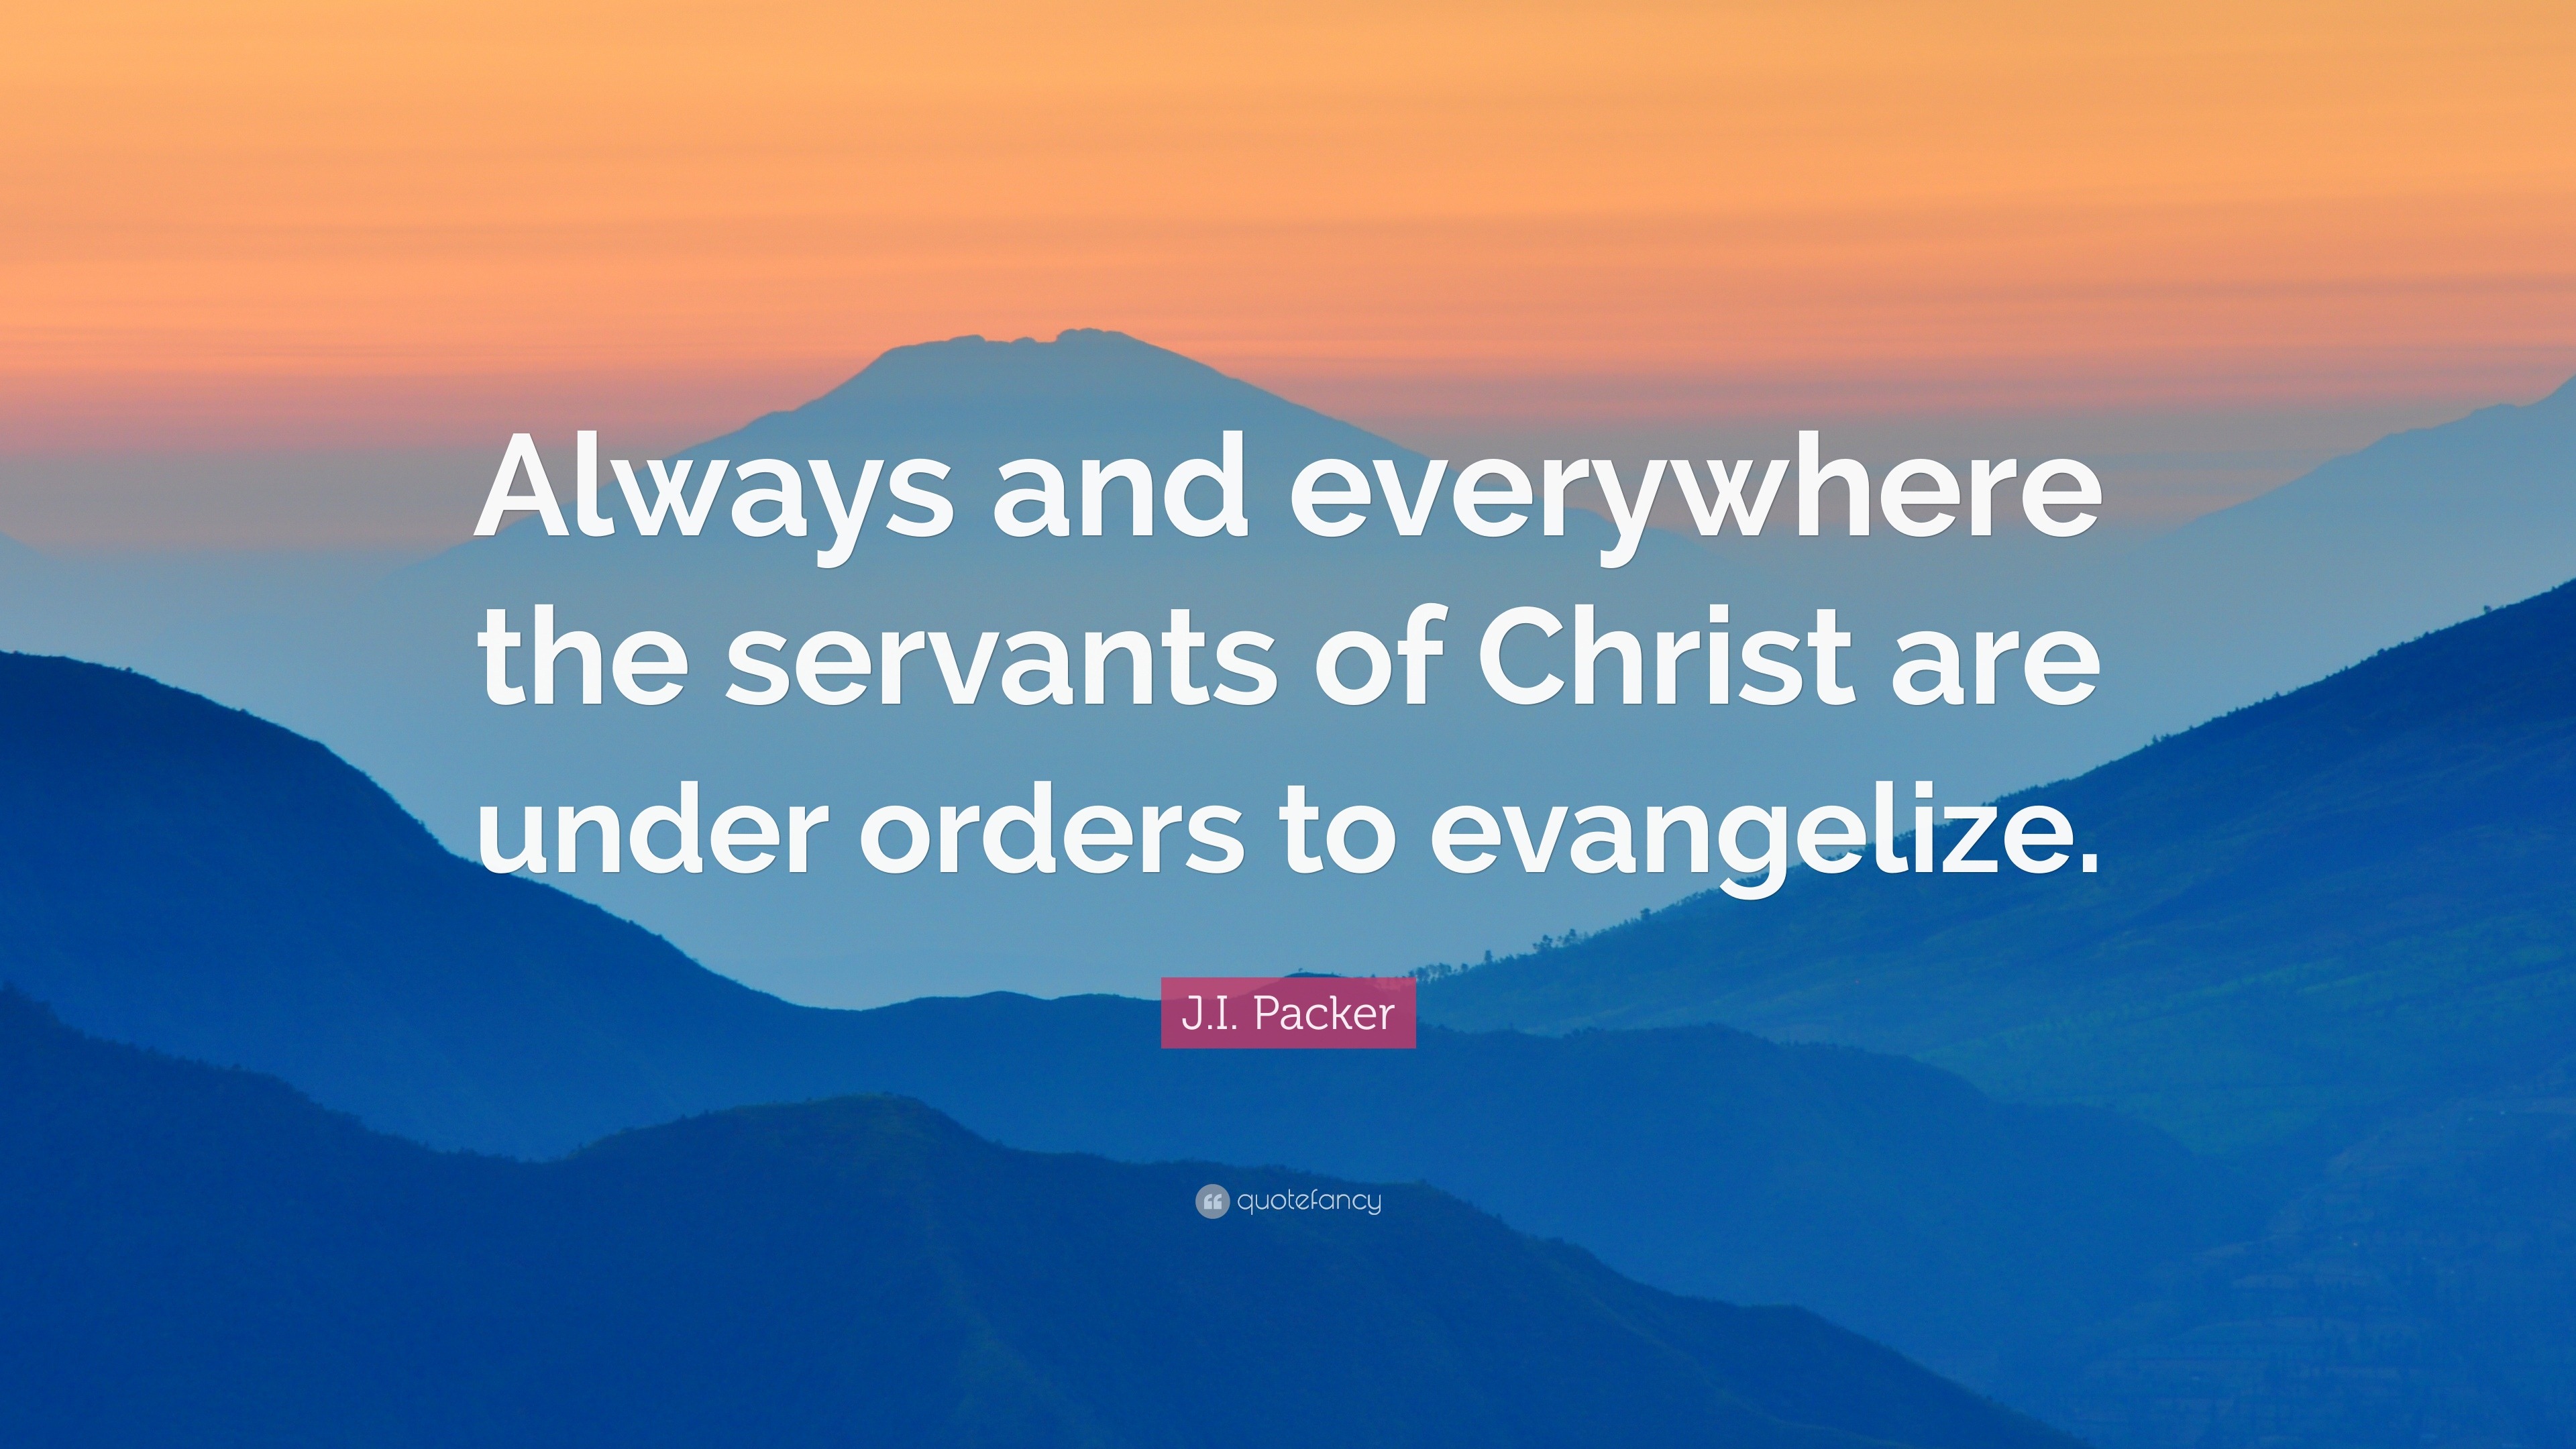 J.I. Packer Quote: “Always and everywhere the servants of Christ are ...